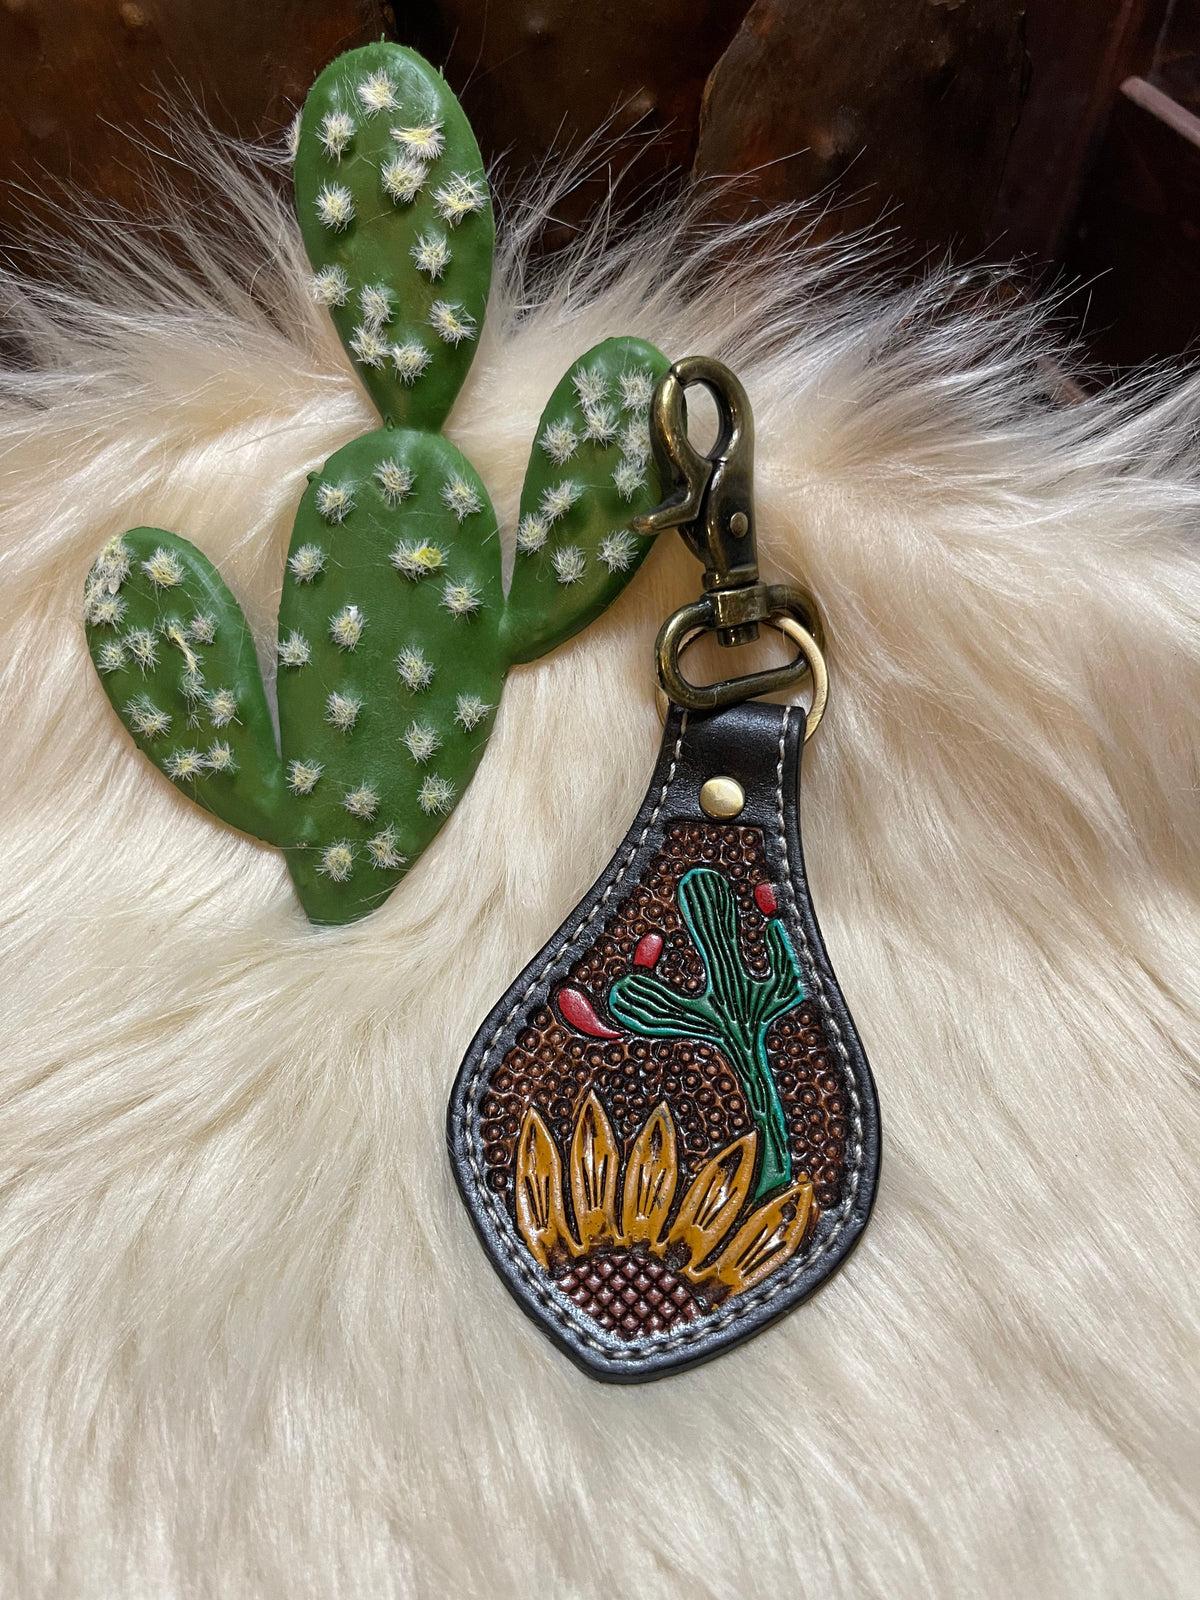 Tooled Leather key fob or purse decor Southwest Bedazzle sw fiesta bags